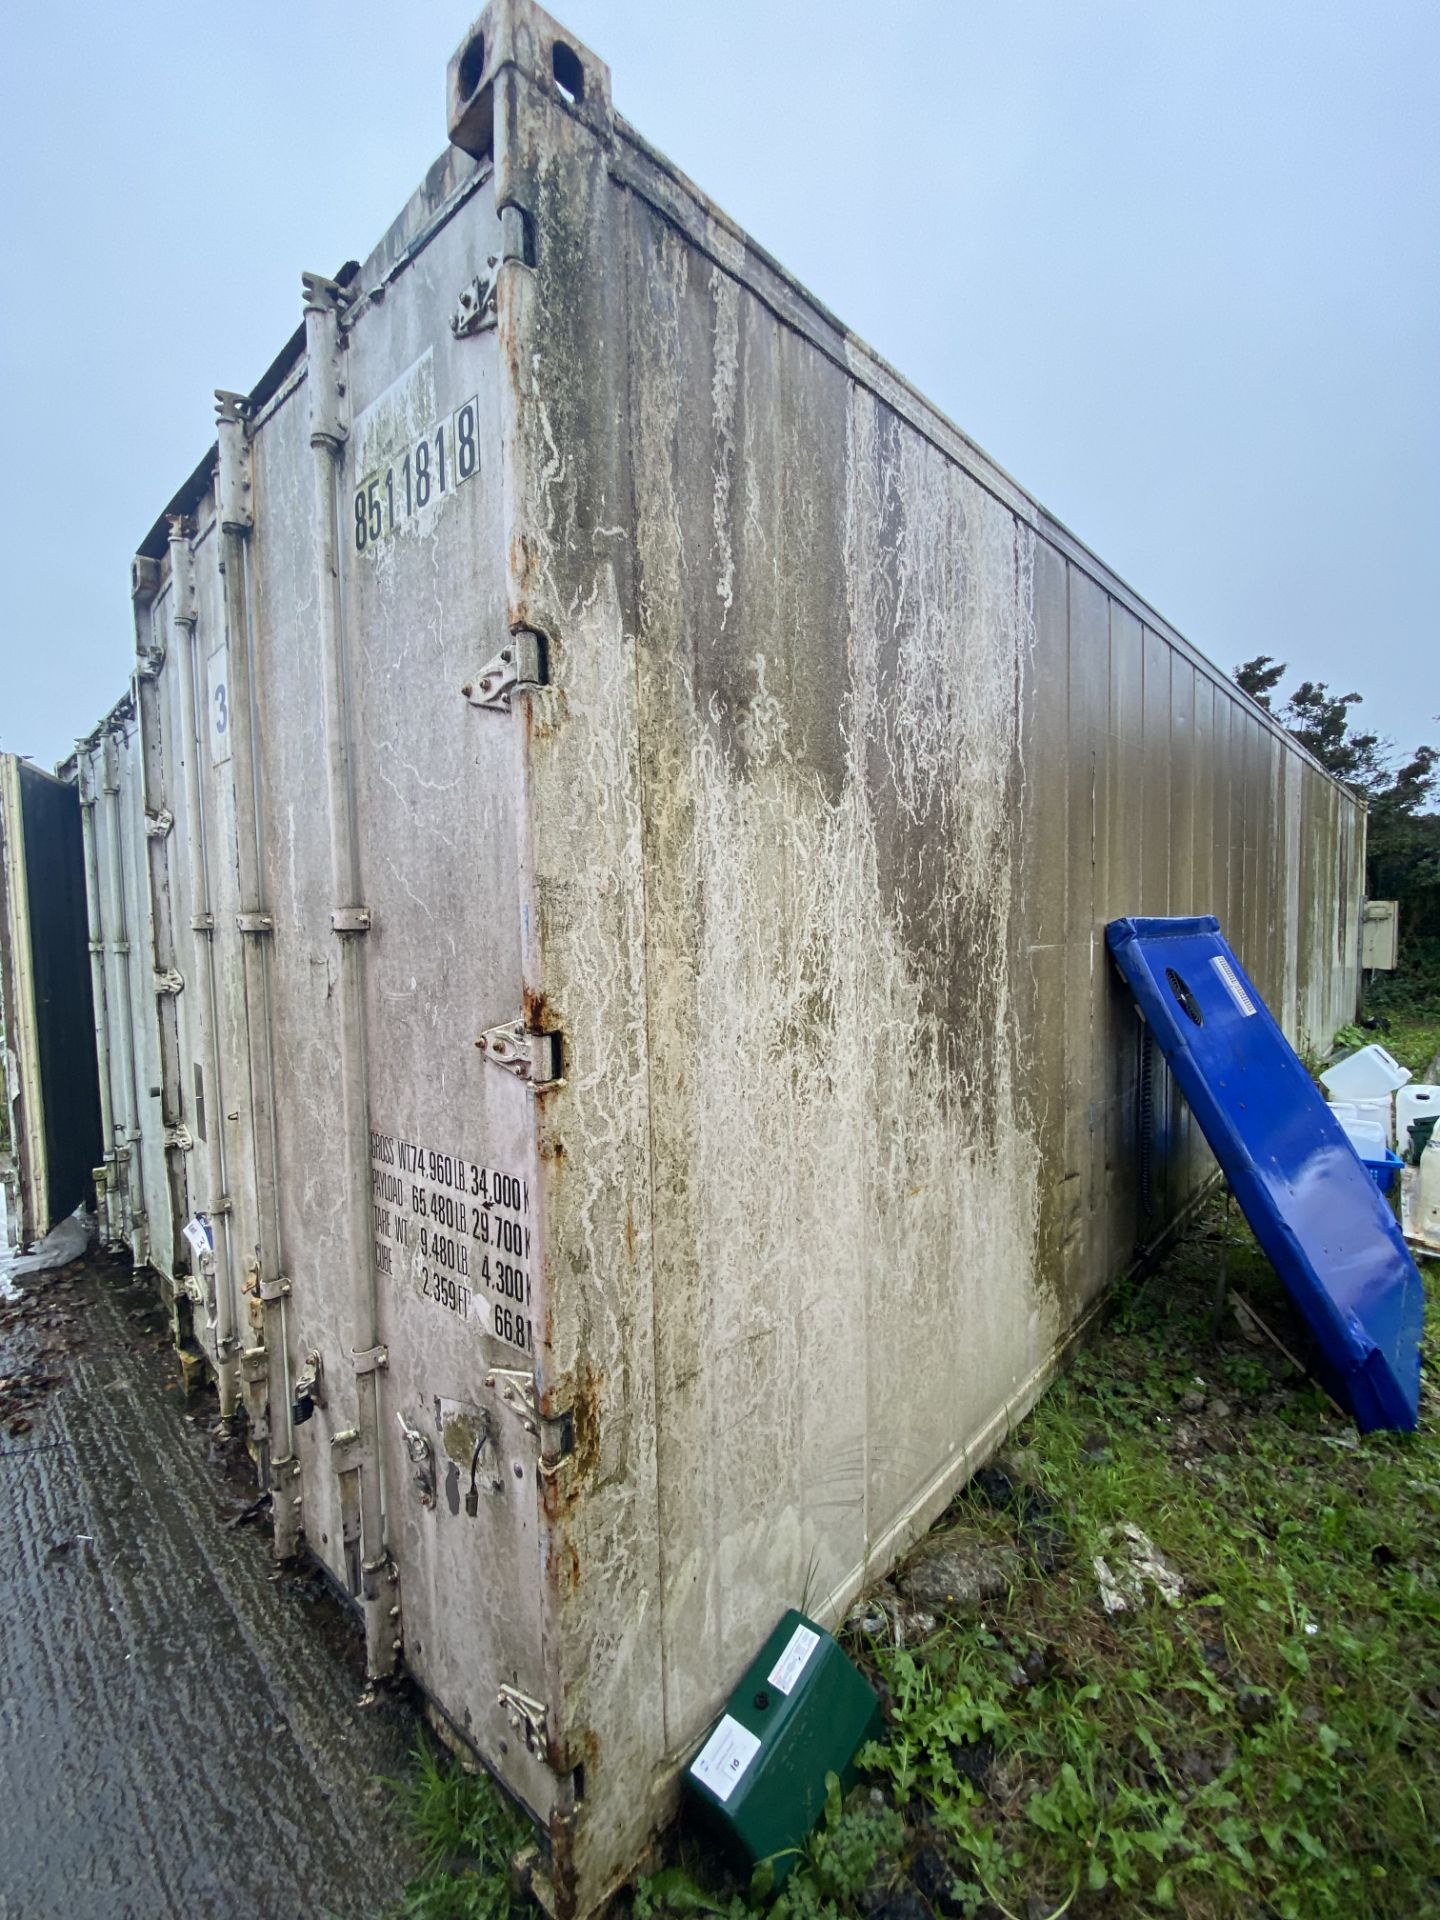 Maersk MC1-RAHC-972 REFRIGERATED CARGO CONTAINER, serial no.23670, year of manufacture 1999, 11.5m - Image 3 of 6